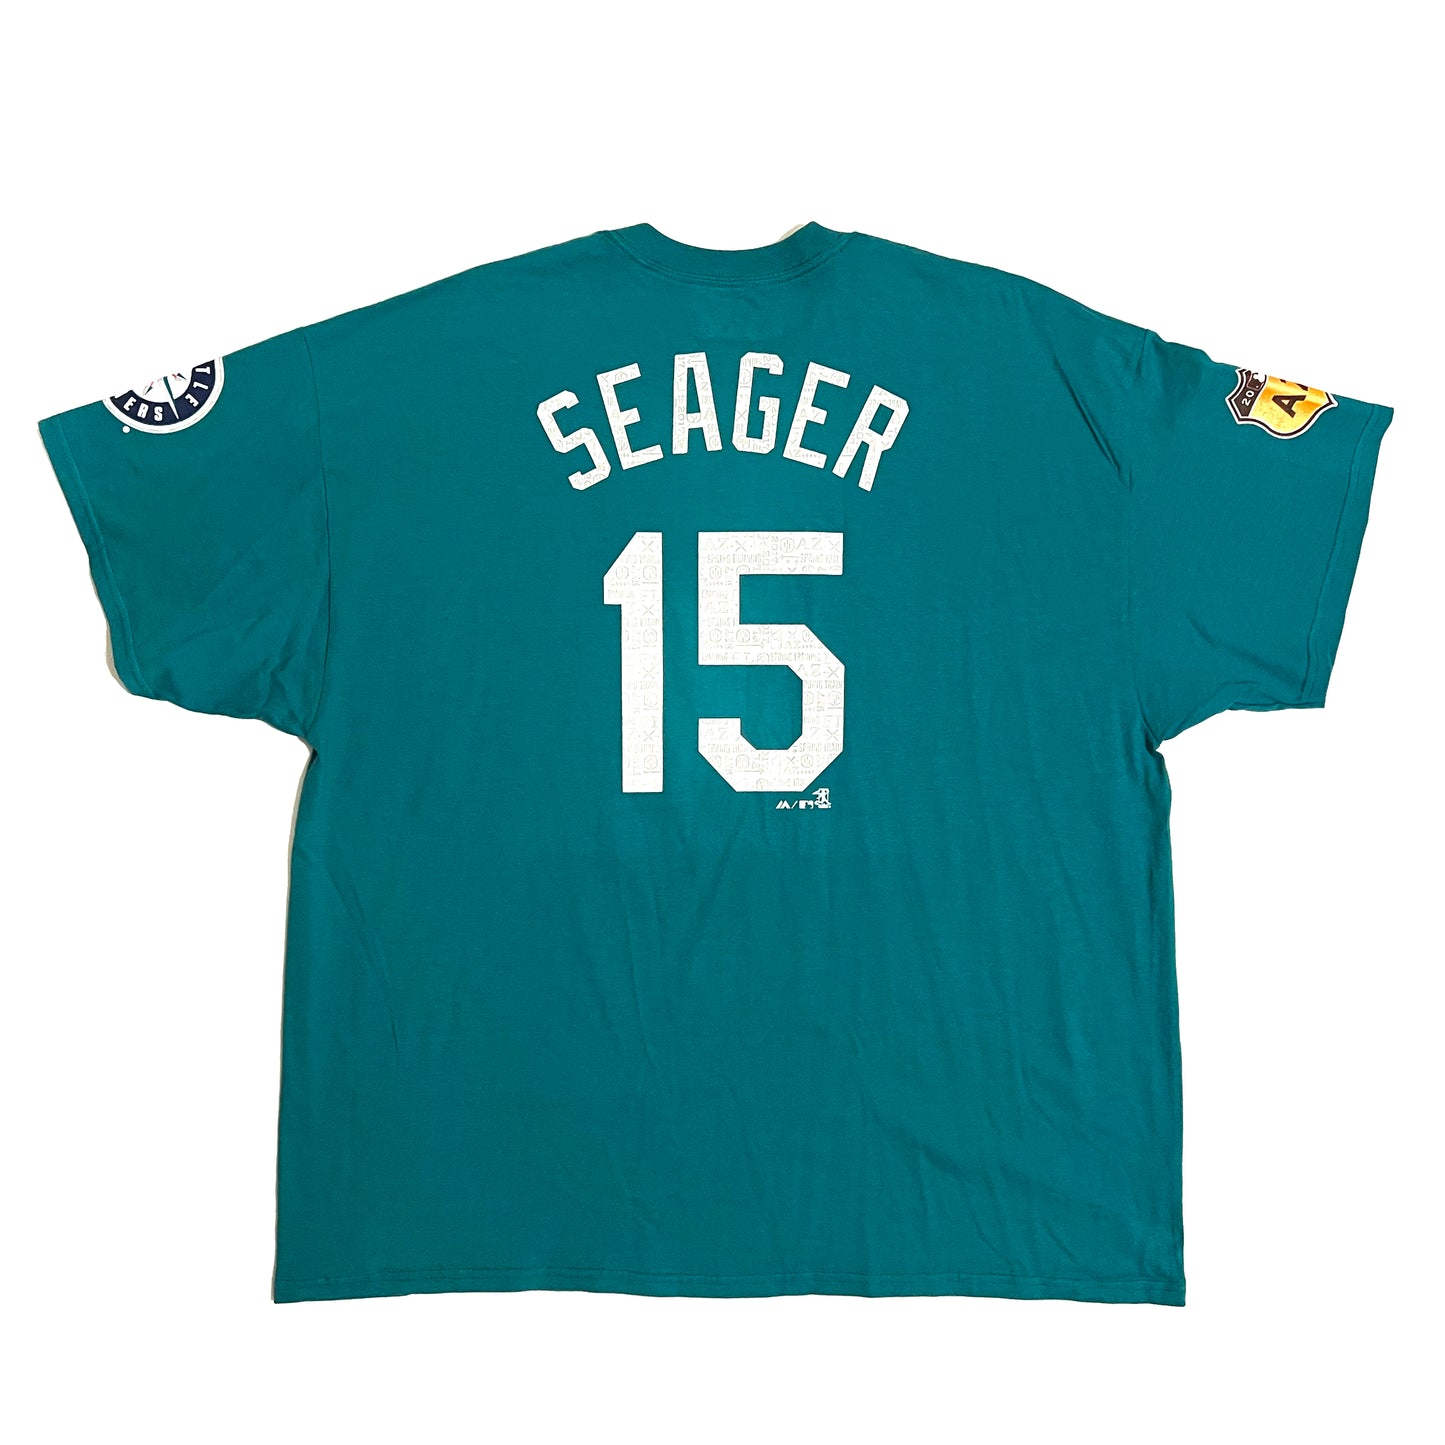 Kyle Seager Seattle Mariners 2017 Spring Training Name & Number Shirt - 2XL